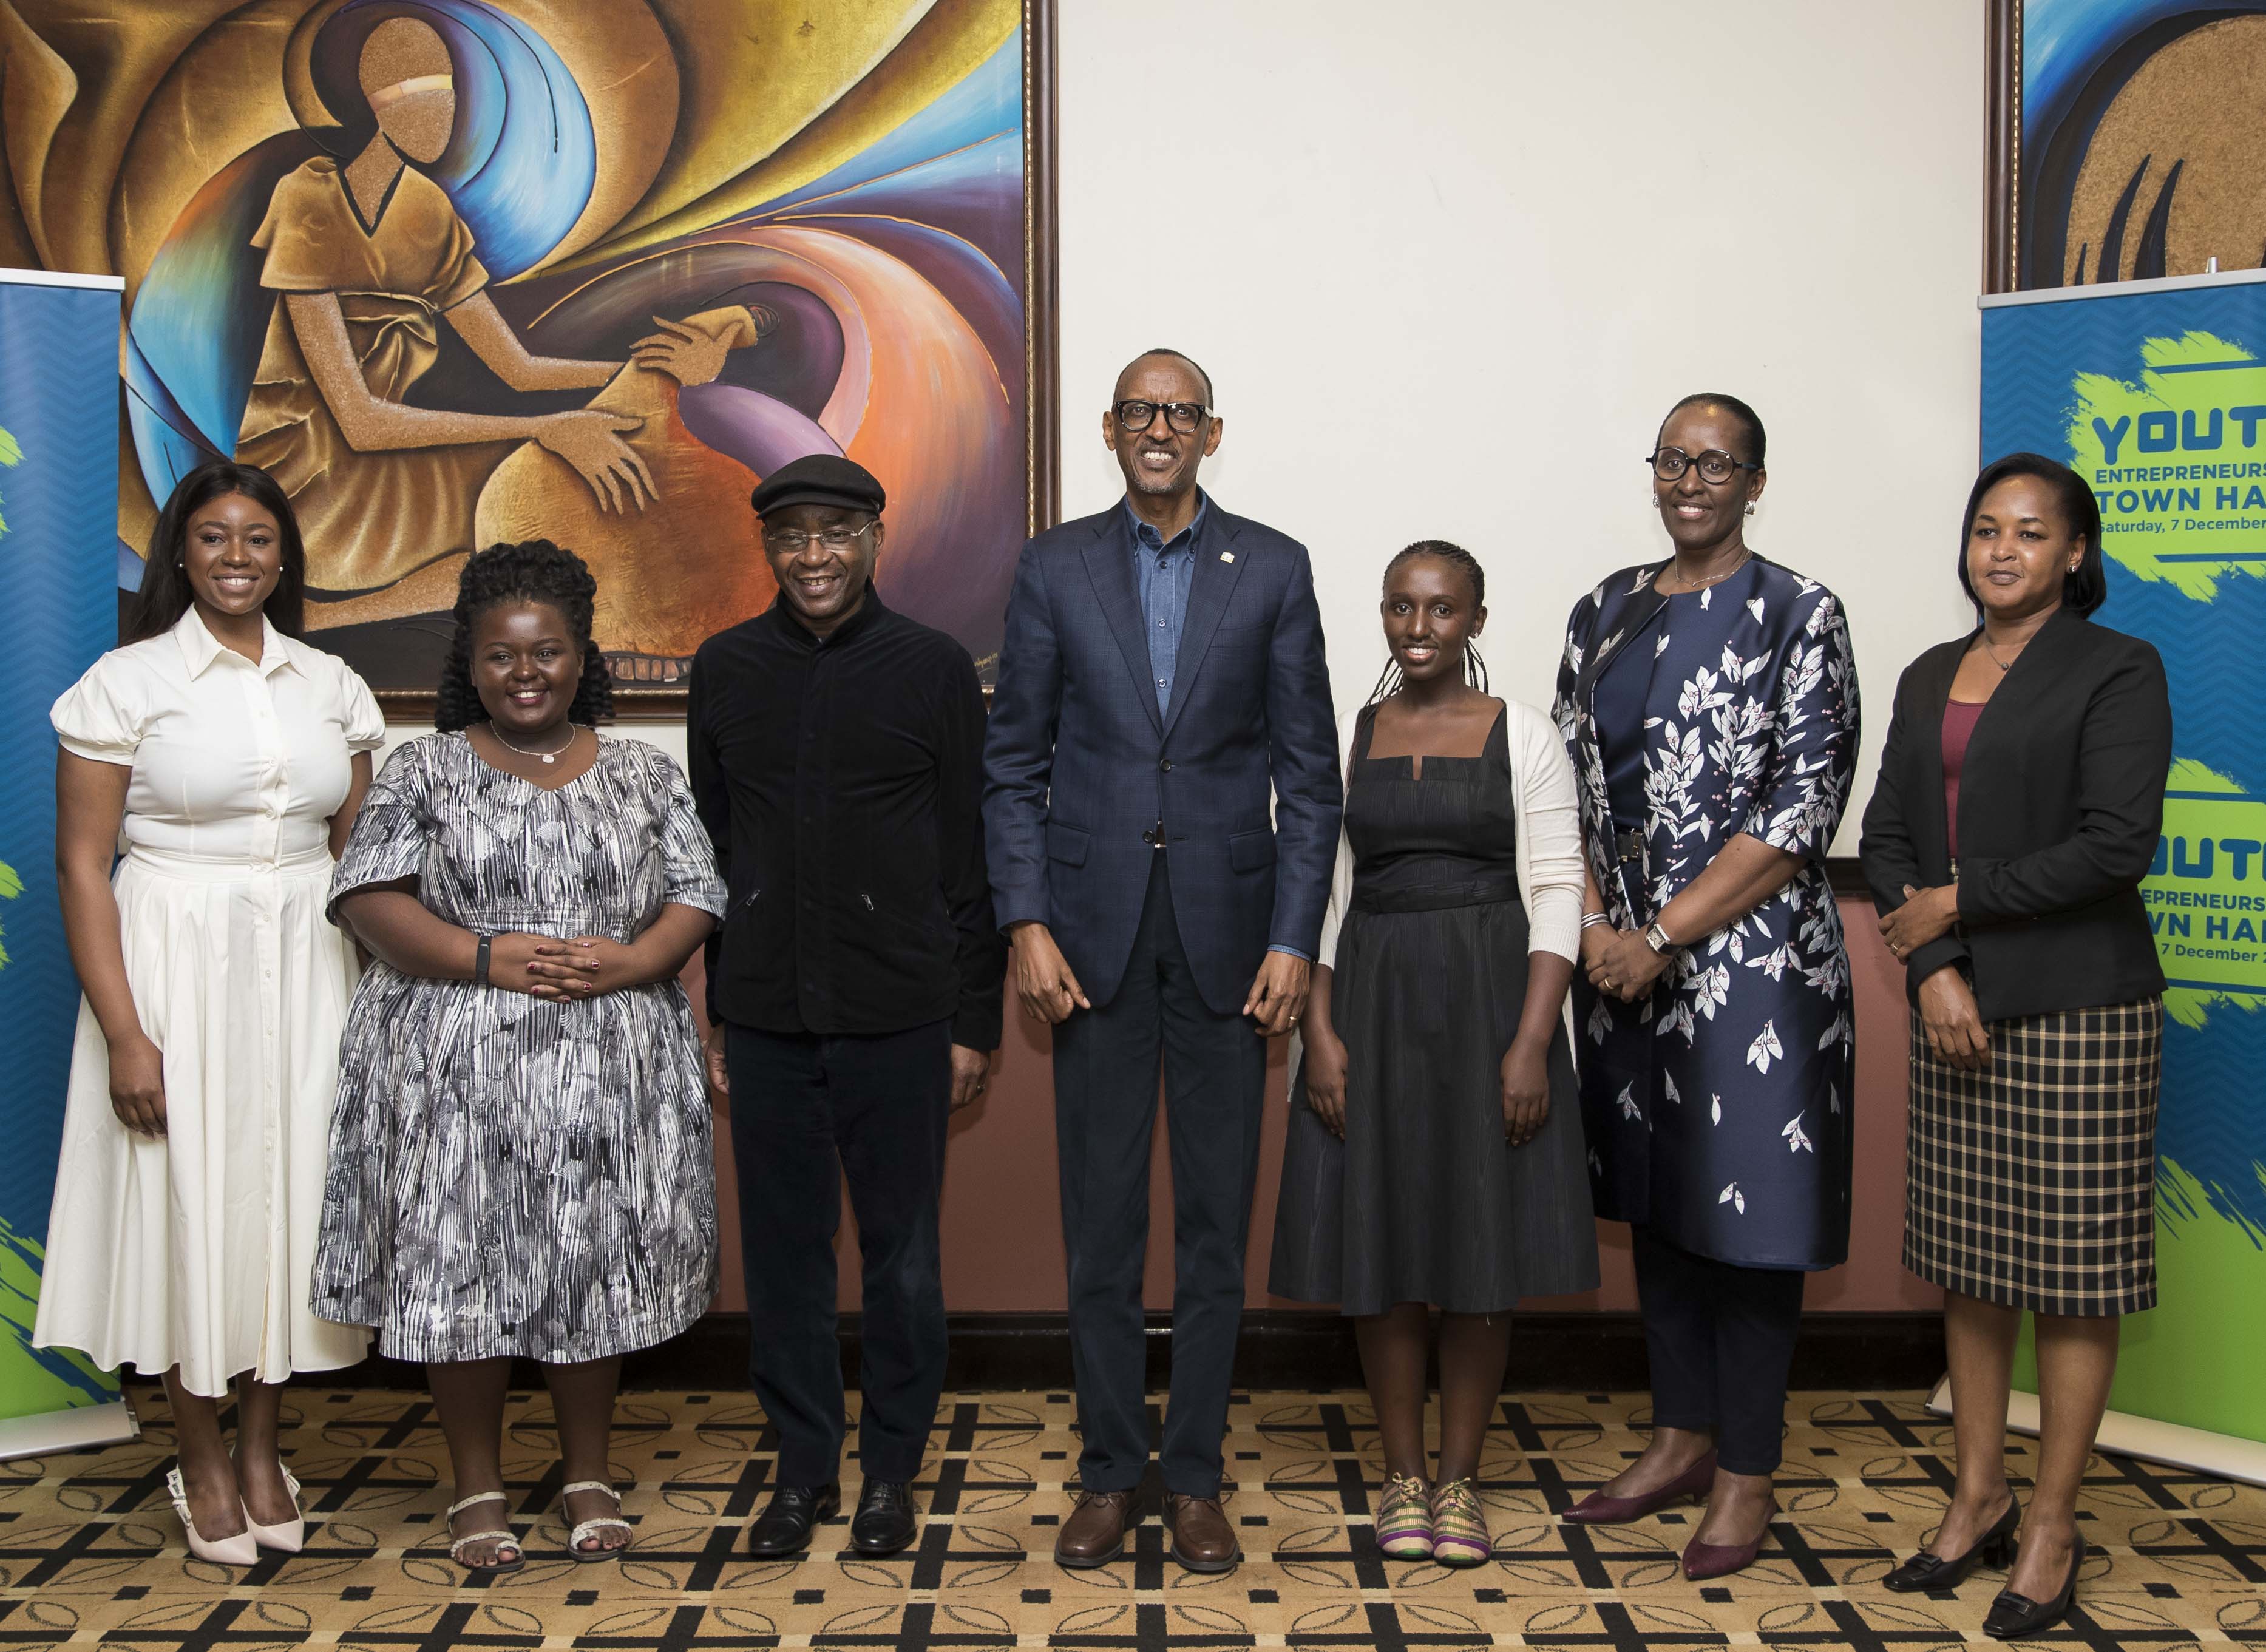 President Kagame, First Lady Jeannette Kagame, Zimbabwean businessman Strive Masiyiwa, and youth and culture minister Rosemary Mbabazi are joined in a group photo by some of the young people who turned up for the Youth Entrepreneurship Town Hall in Kigali on Saturday. 